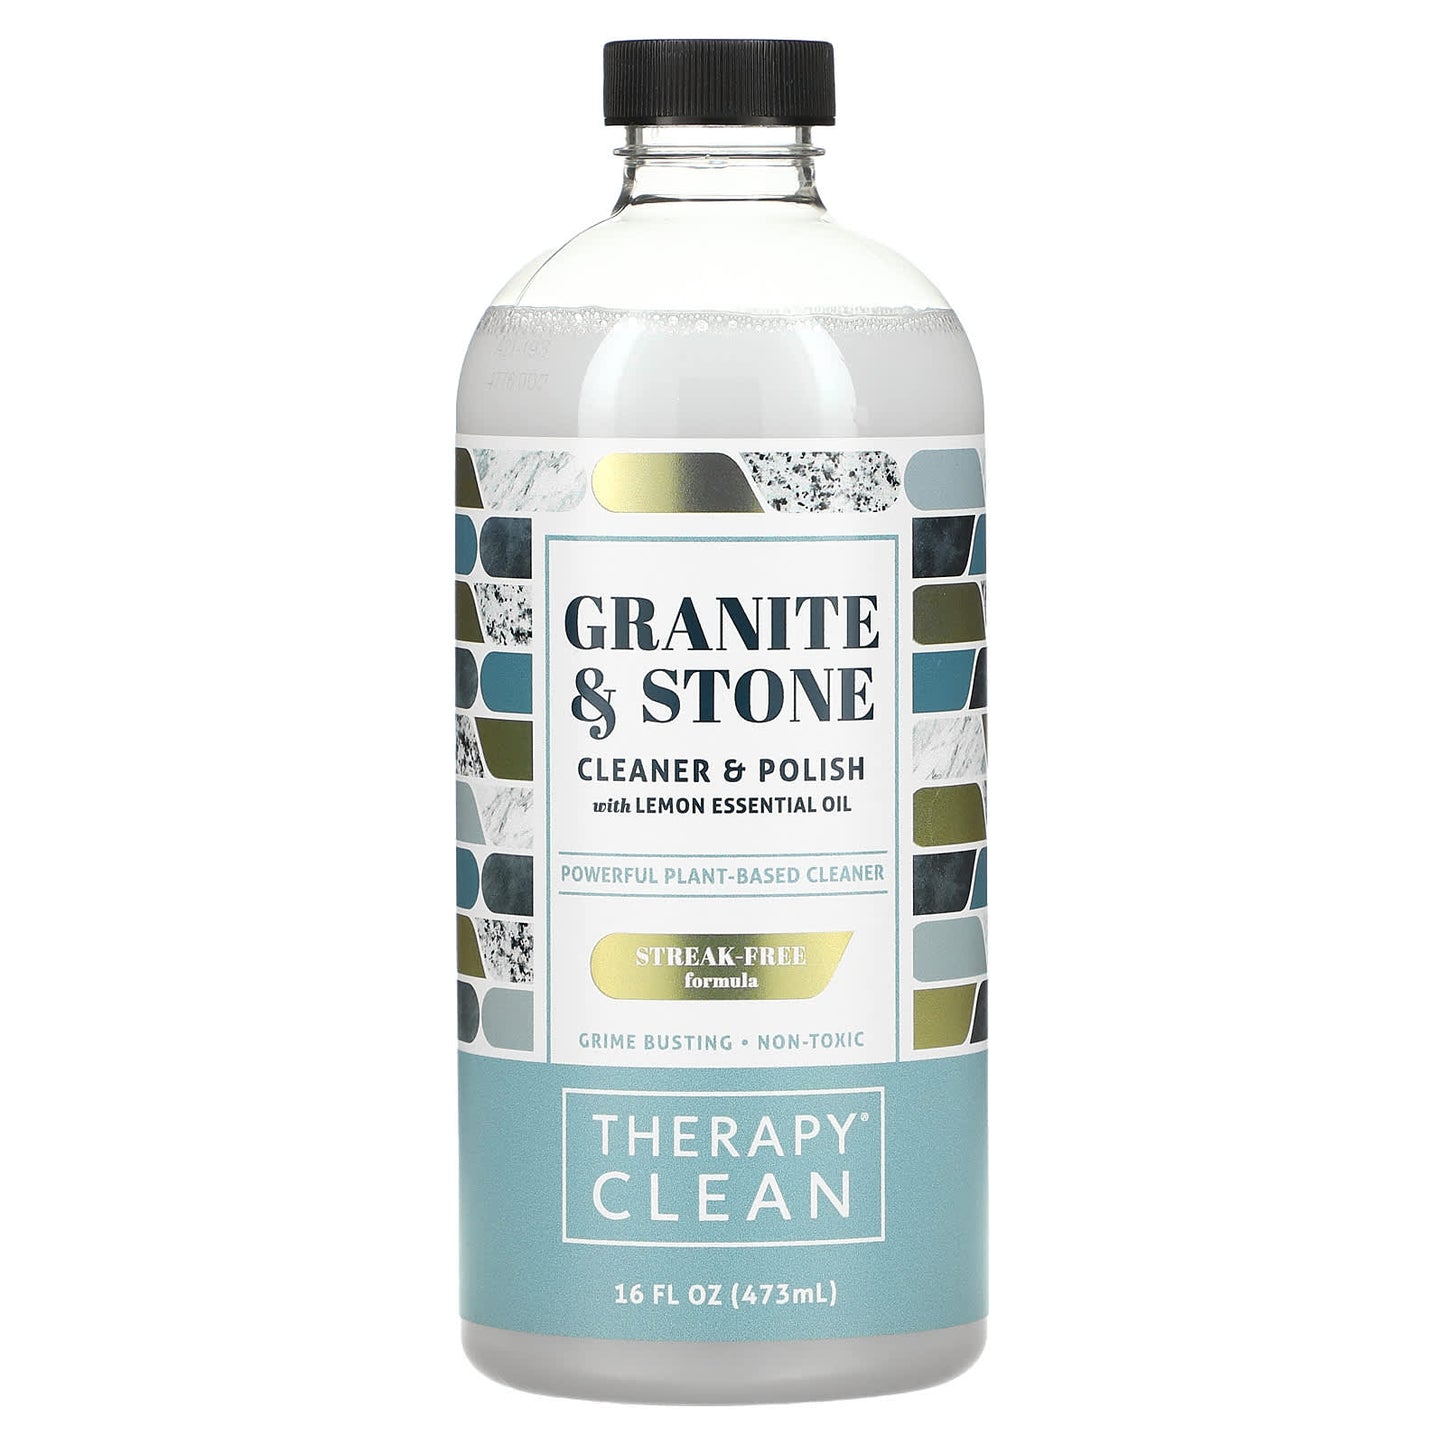 Therapy Clean-Granite & Stone-Cleaner & Polish with Lemon Essential Oil-16 fl oz (473 ml)